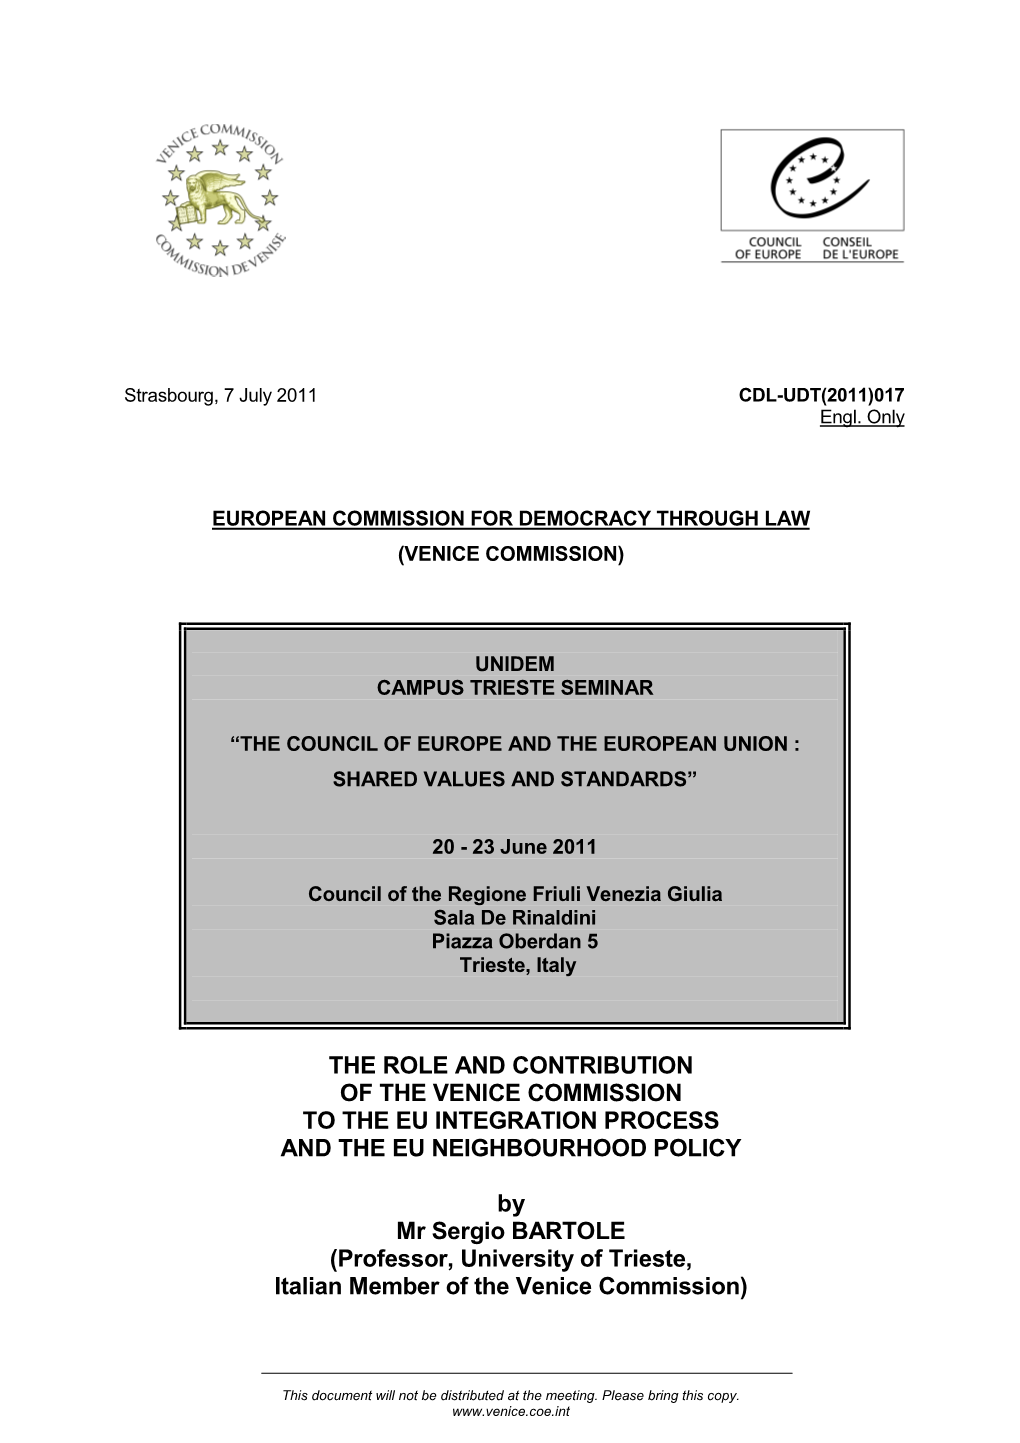 The Role and Contribution of the Venice Commission to the Eu Integration Process and the Eu Neighbourhood Policy